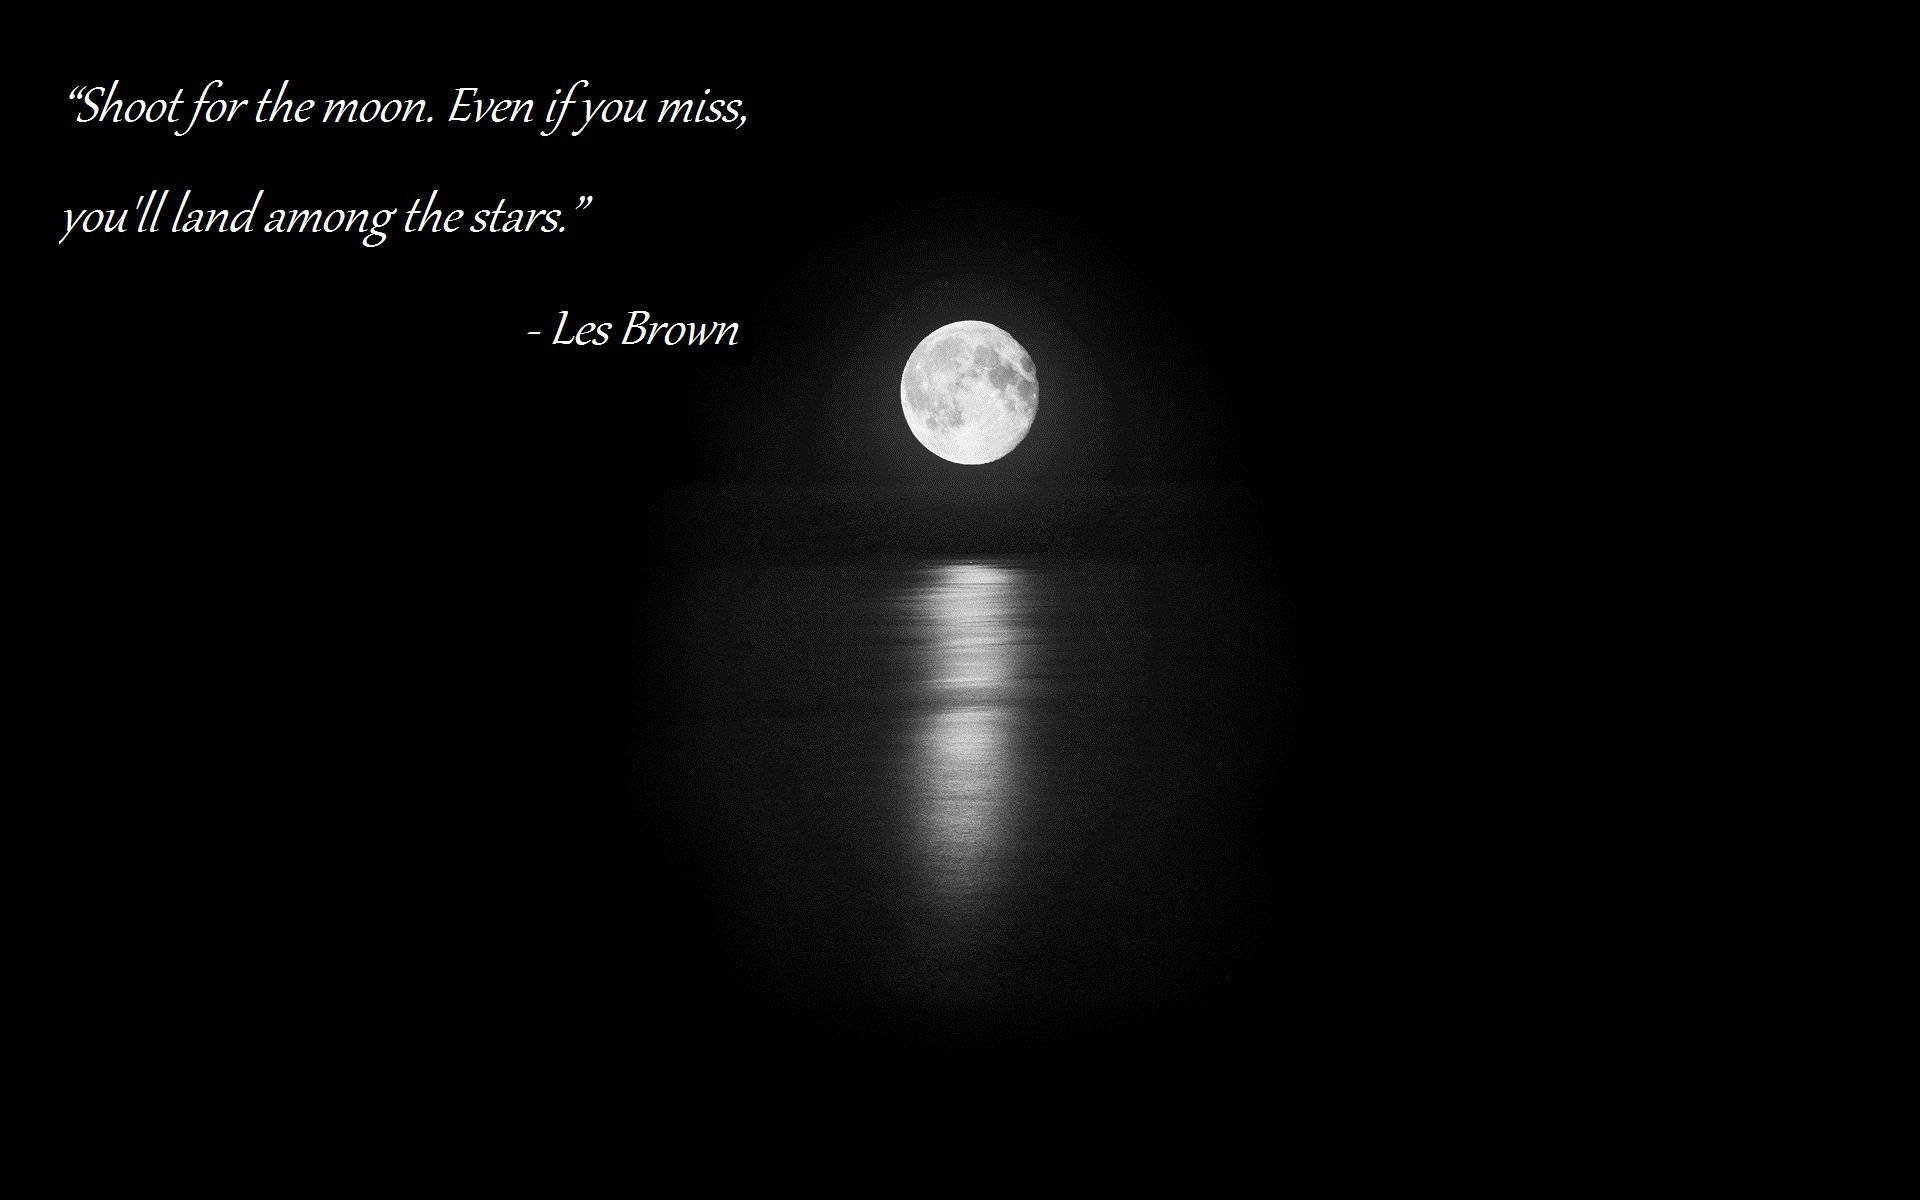 Les Brown's Moon Inspiration